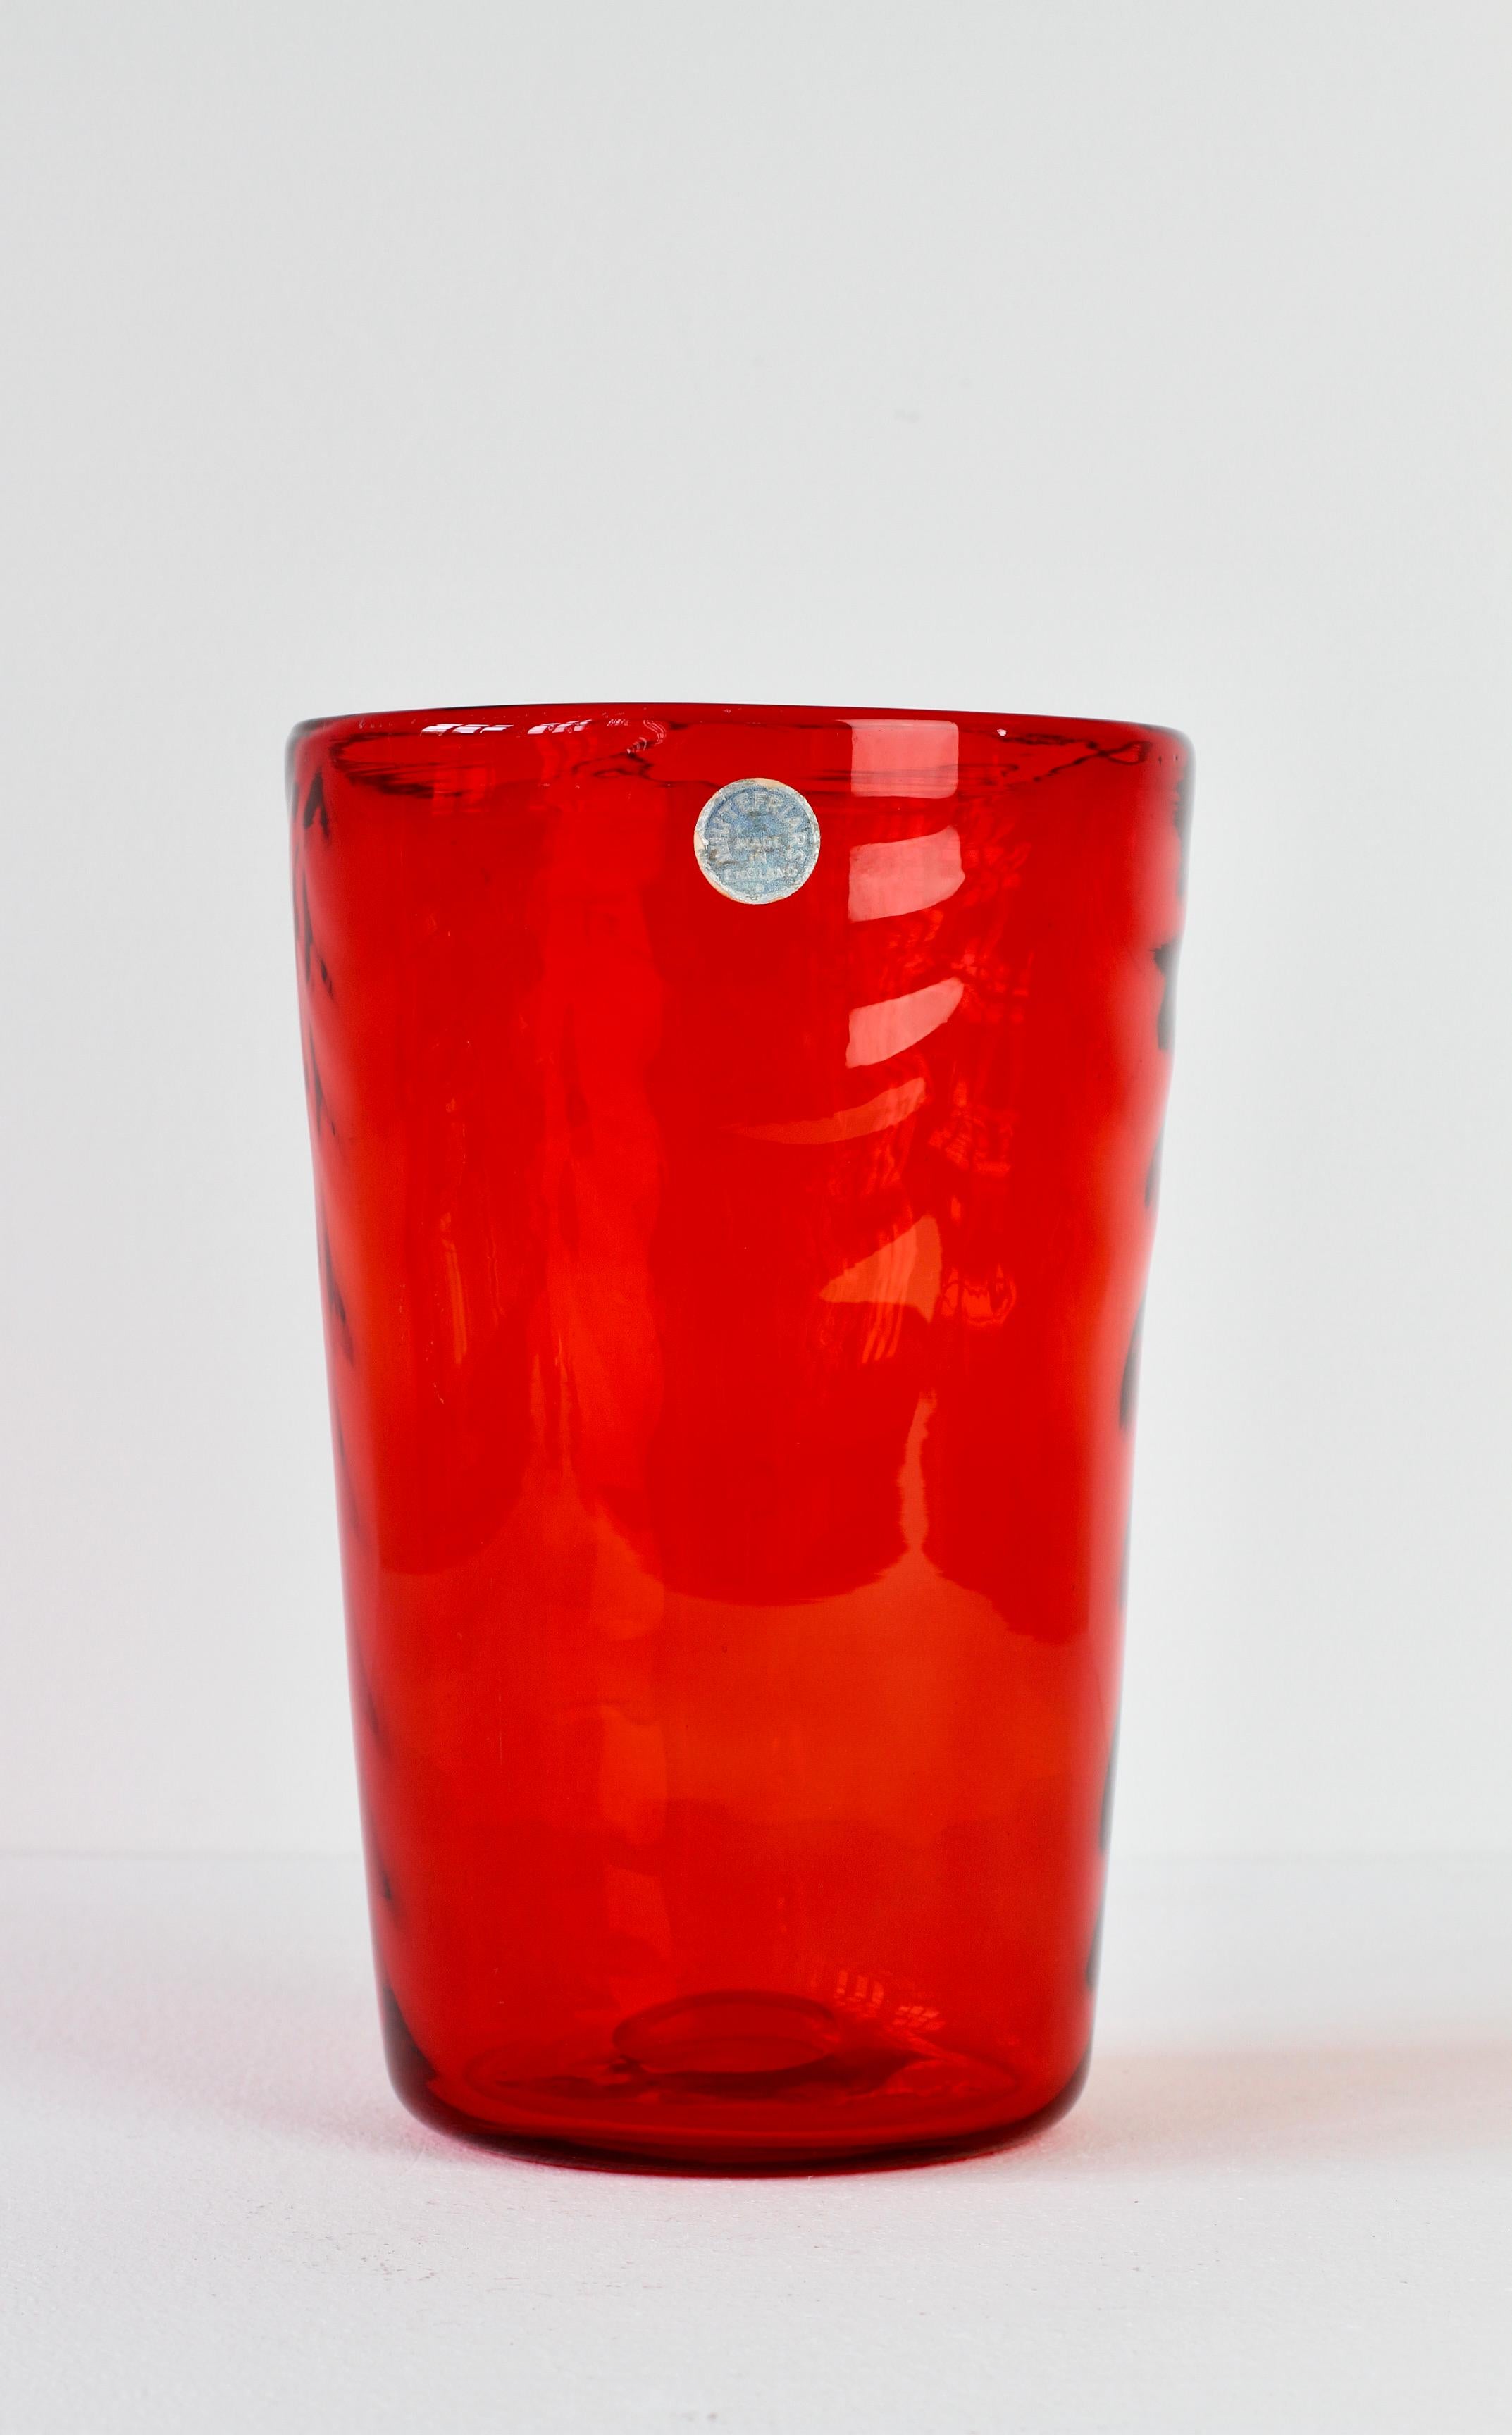 Whitefriars Vintage Vibrant Red Glass Vase by Barnaby Marriott Powel, C. 1940 For Sale 3